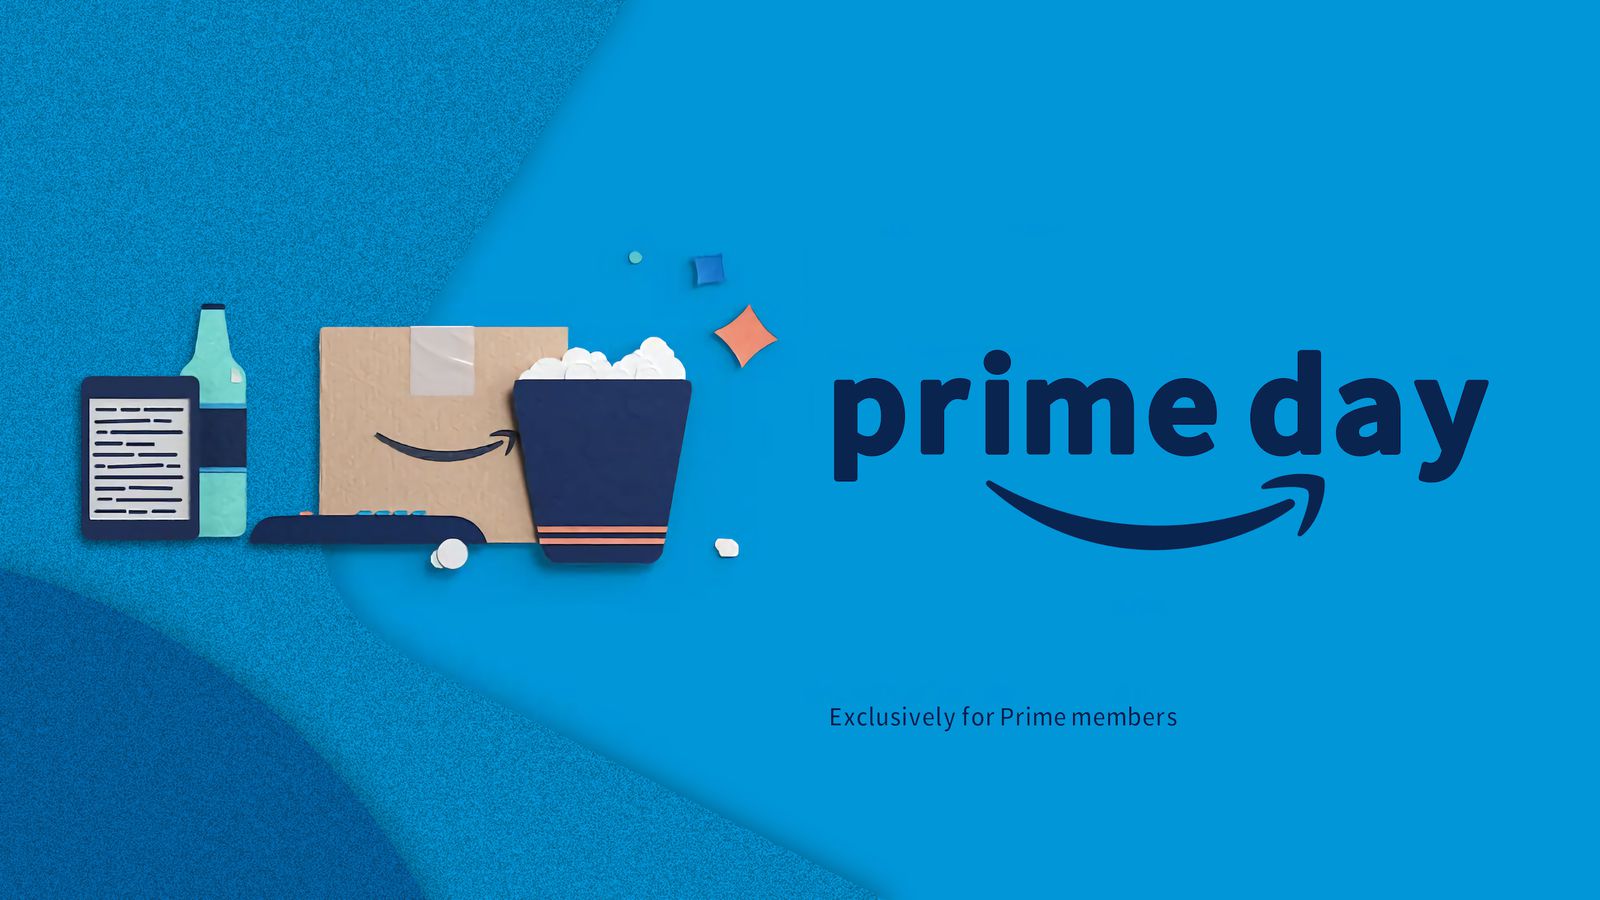 Kicks Off Early Prime Day Deals With Up to 69% Off Fire Tablets,  Echo Devices, and More - MacRumors